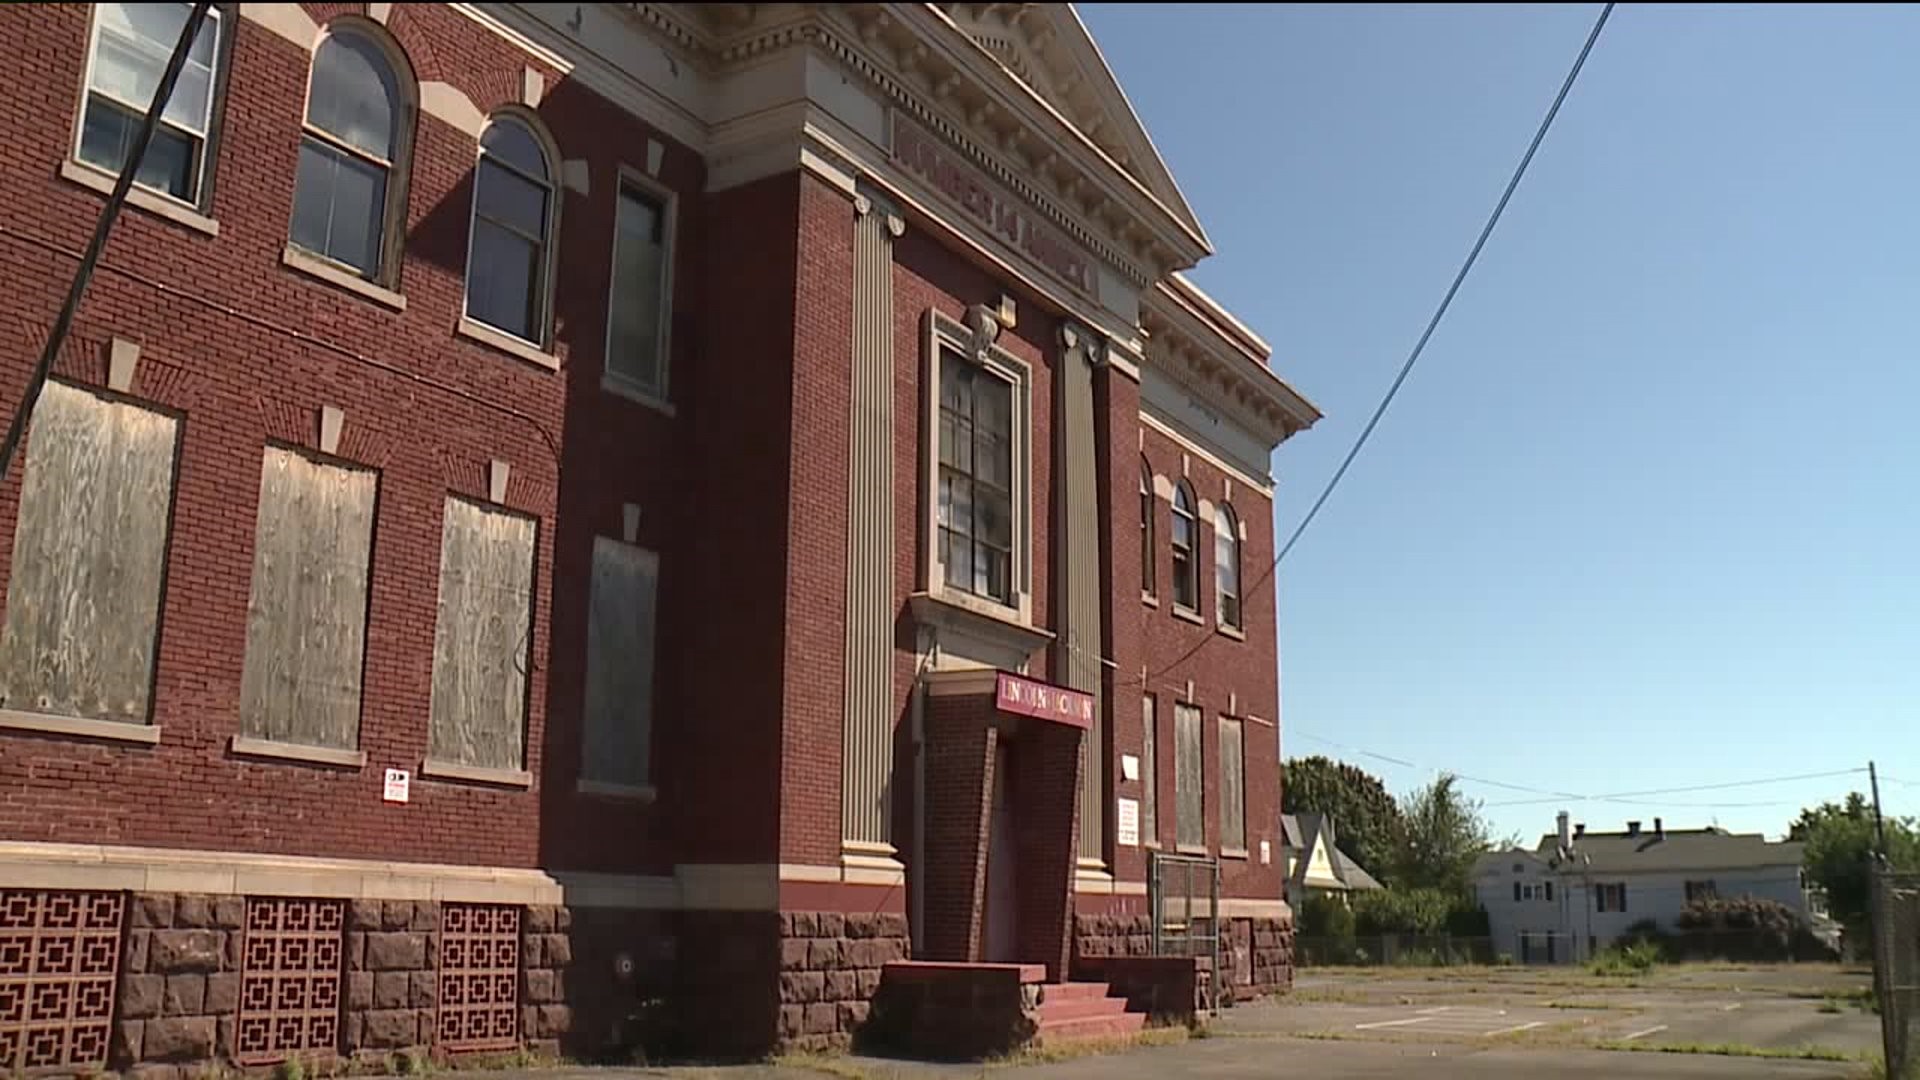 Vacant Scranton School Slated to Become Apartments